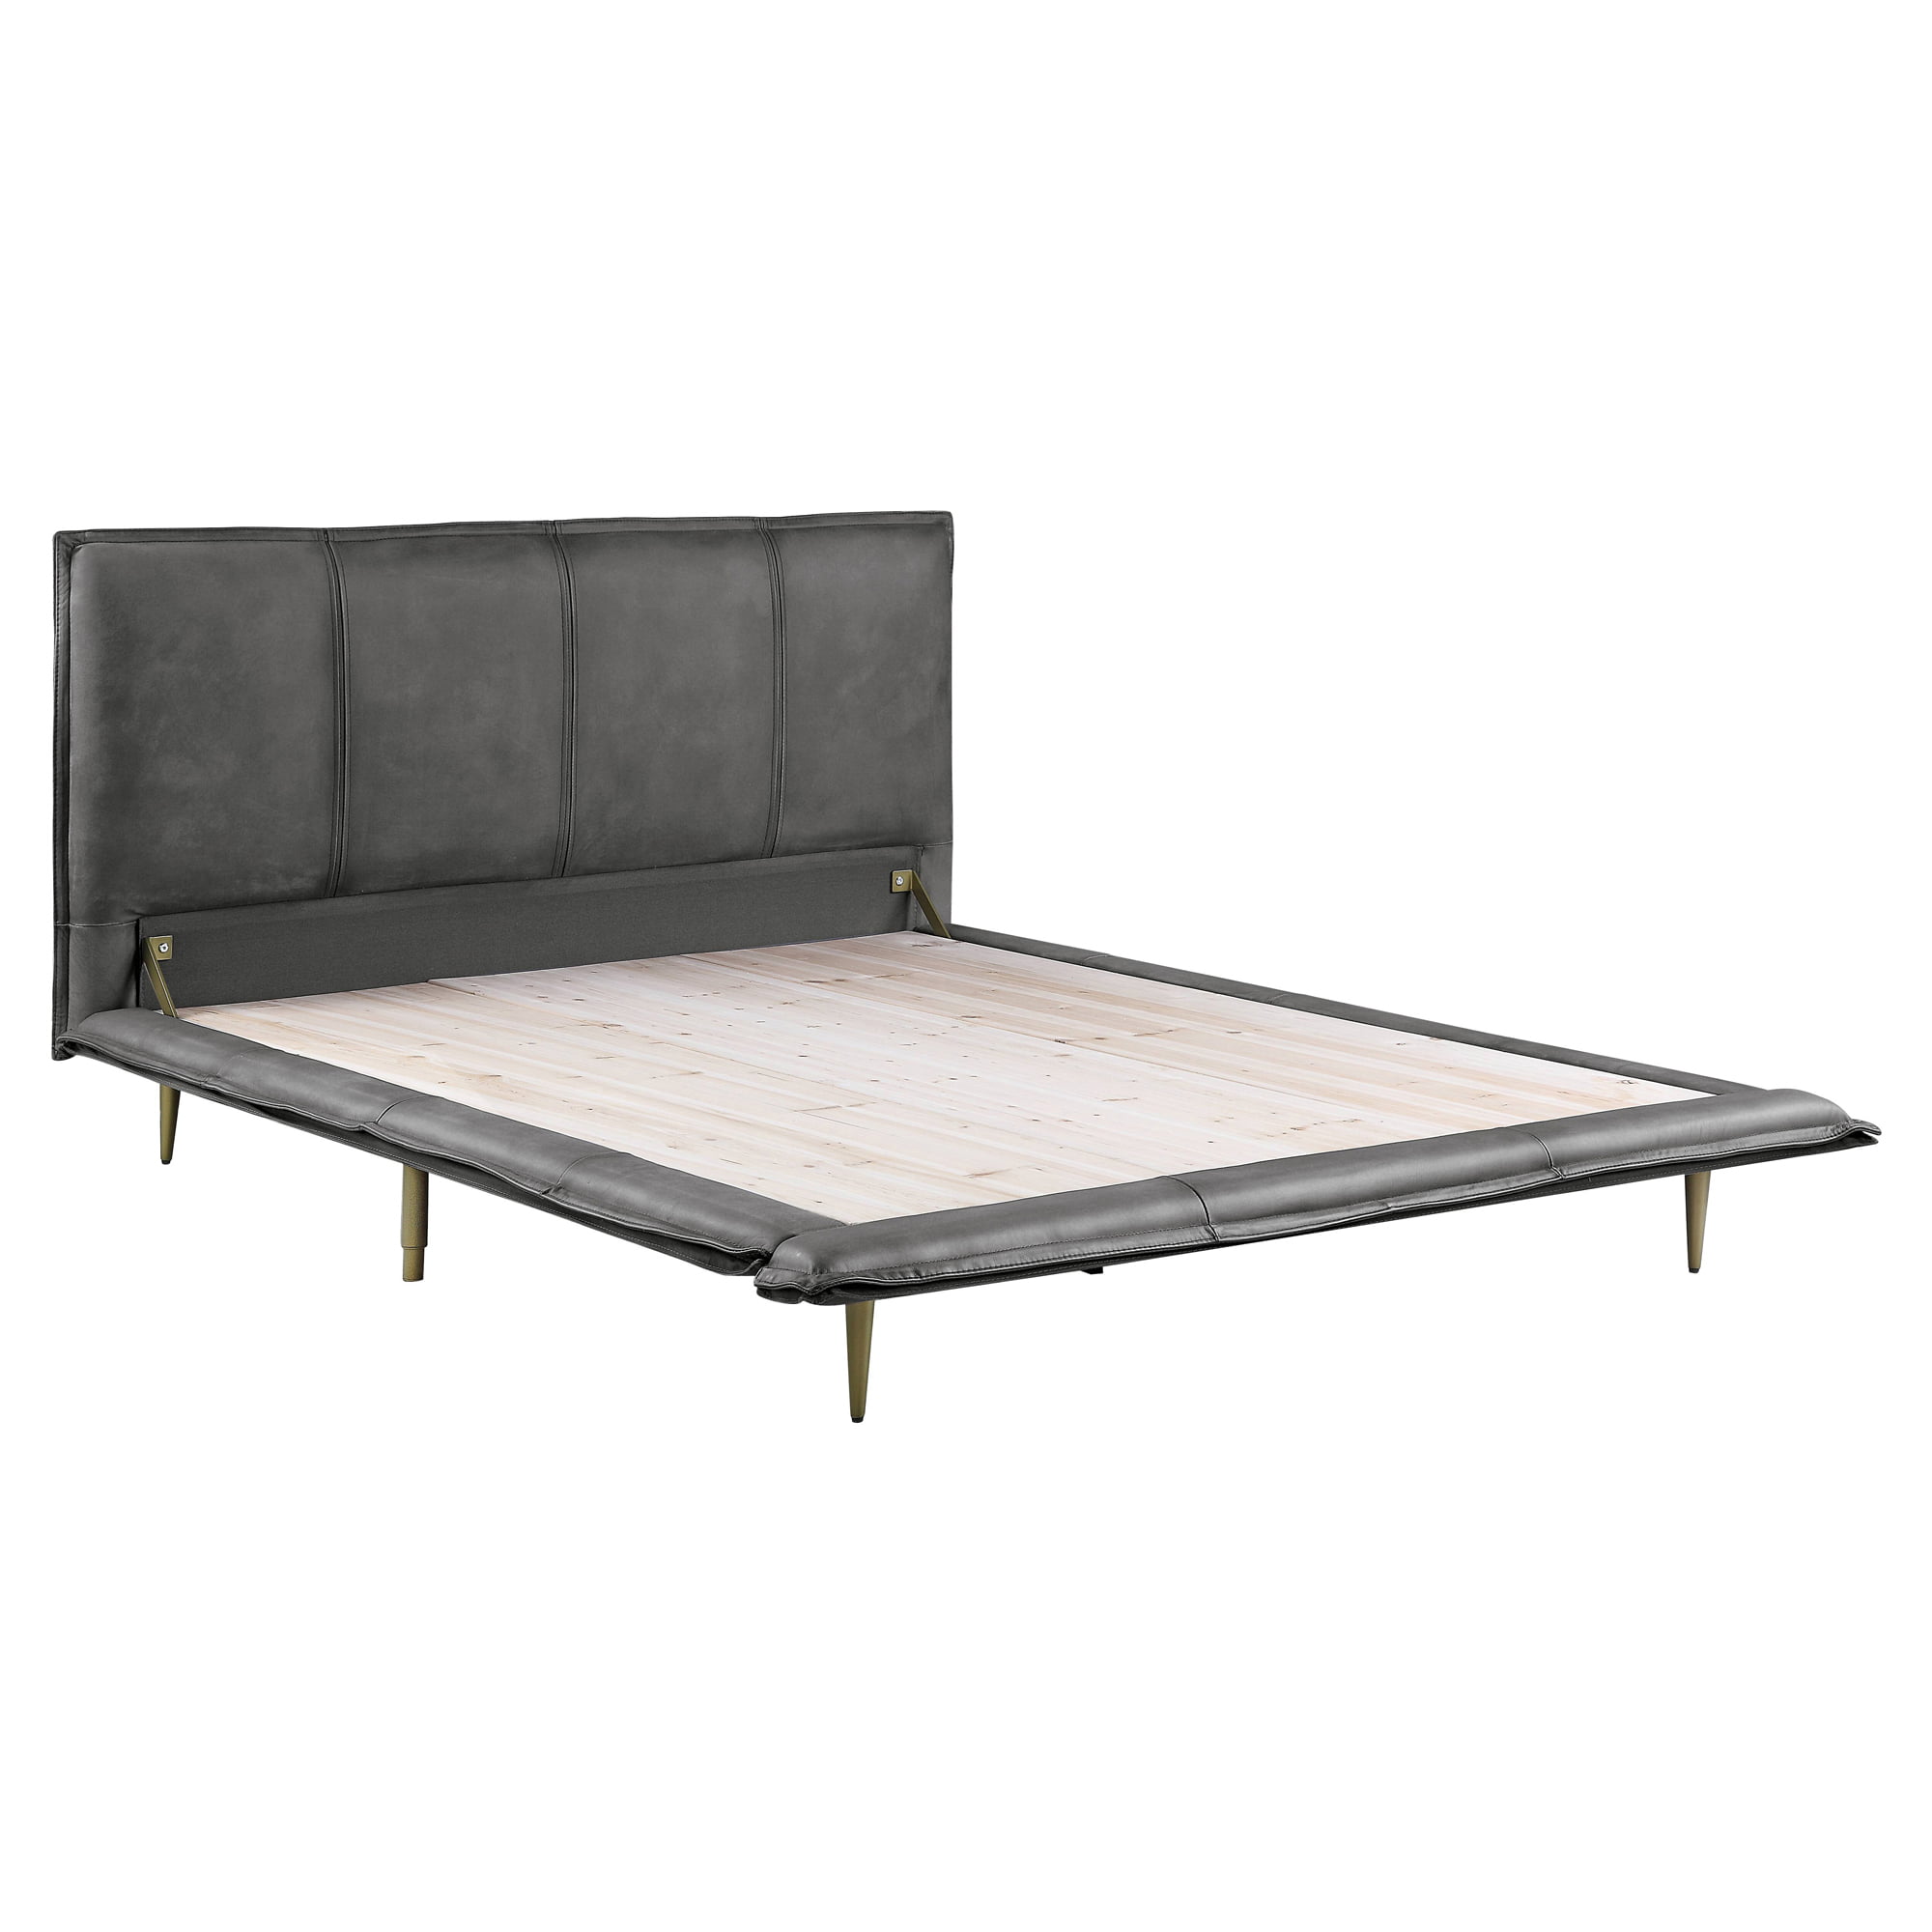 Picture of Acme Furniture BD00558EK 90 x 90 x 41 in. Metis Eastern Bed, Gray Top Grain Leather - King Size